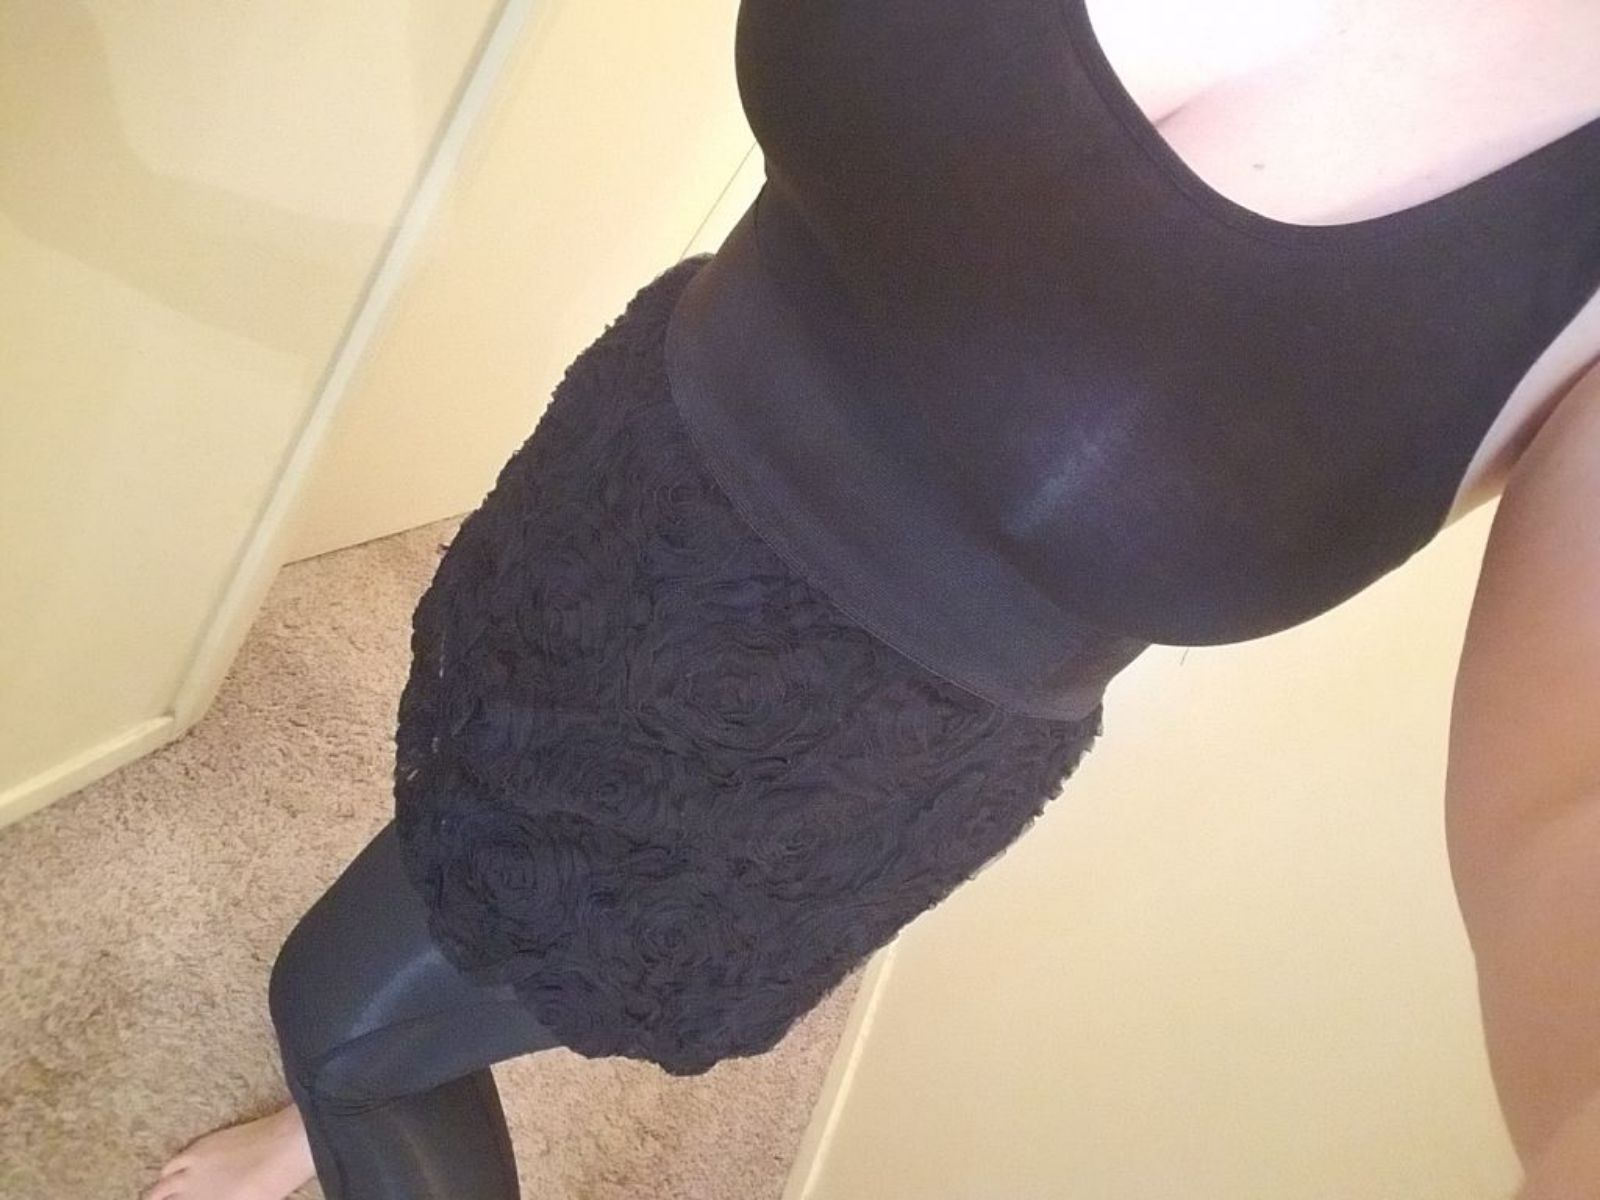 I just love my girlfriends curves, she's a mother of 1, and she wants to know what you guys think. And would do. Pms and comments welcome, she'd love to see them